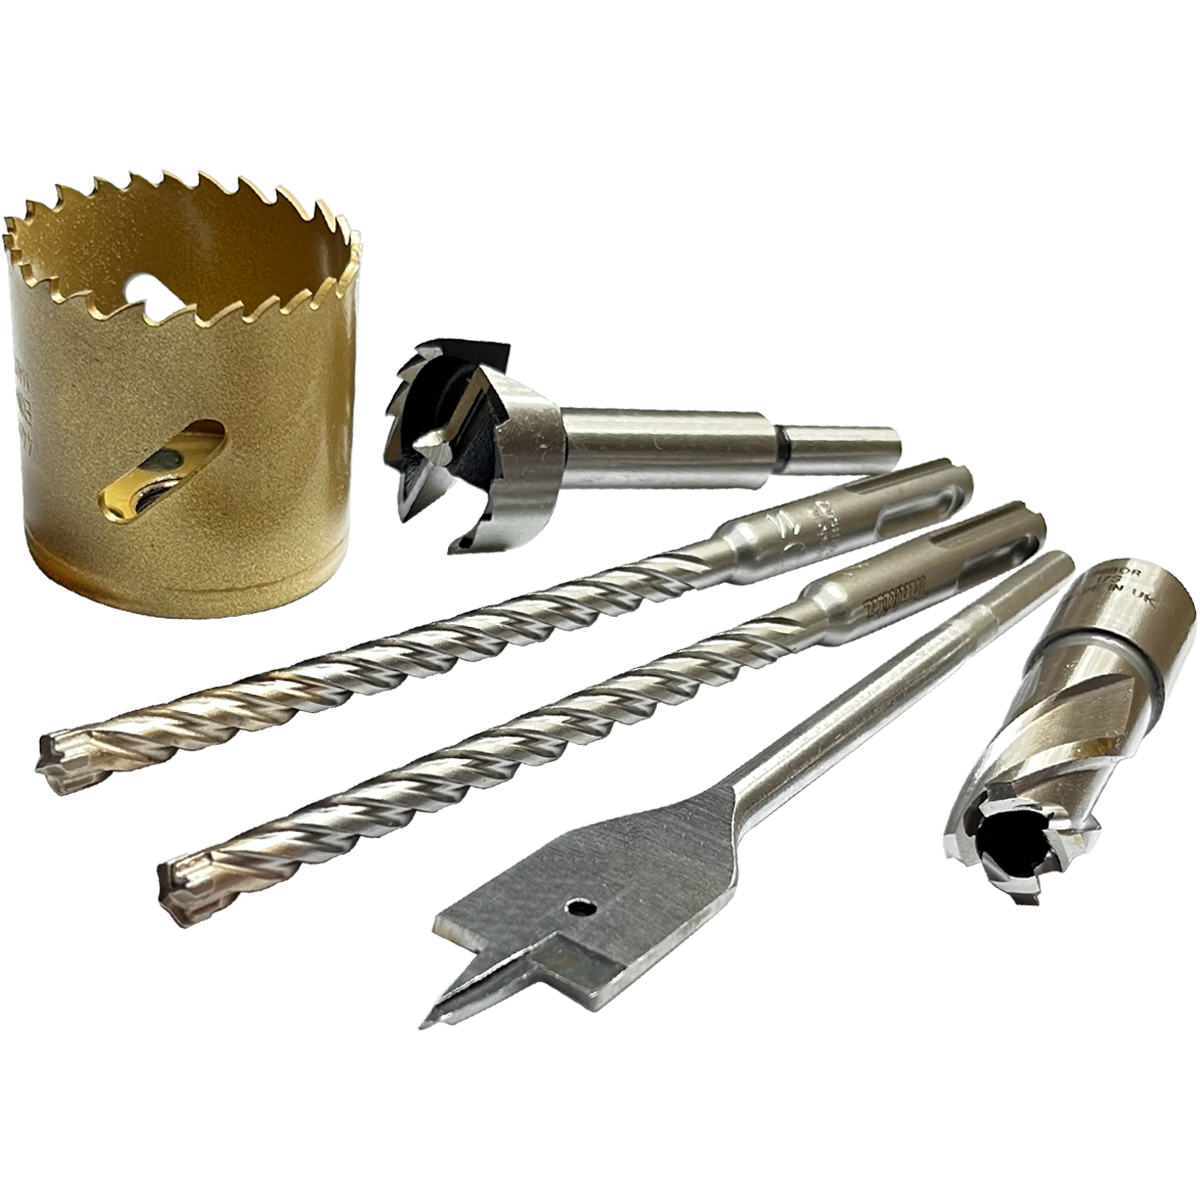 A comprehensive range of drill bits and cutters to suit numerous requirements.